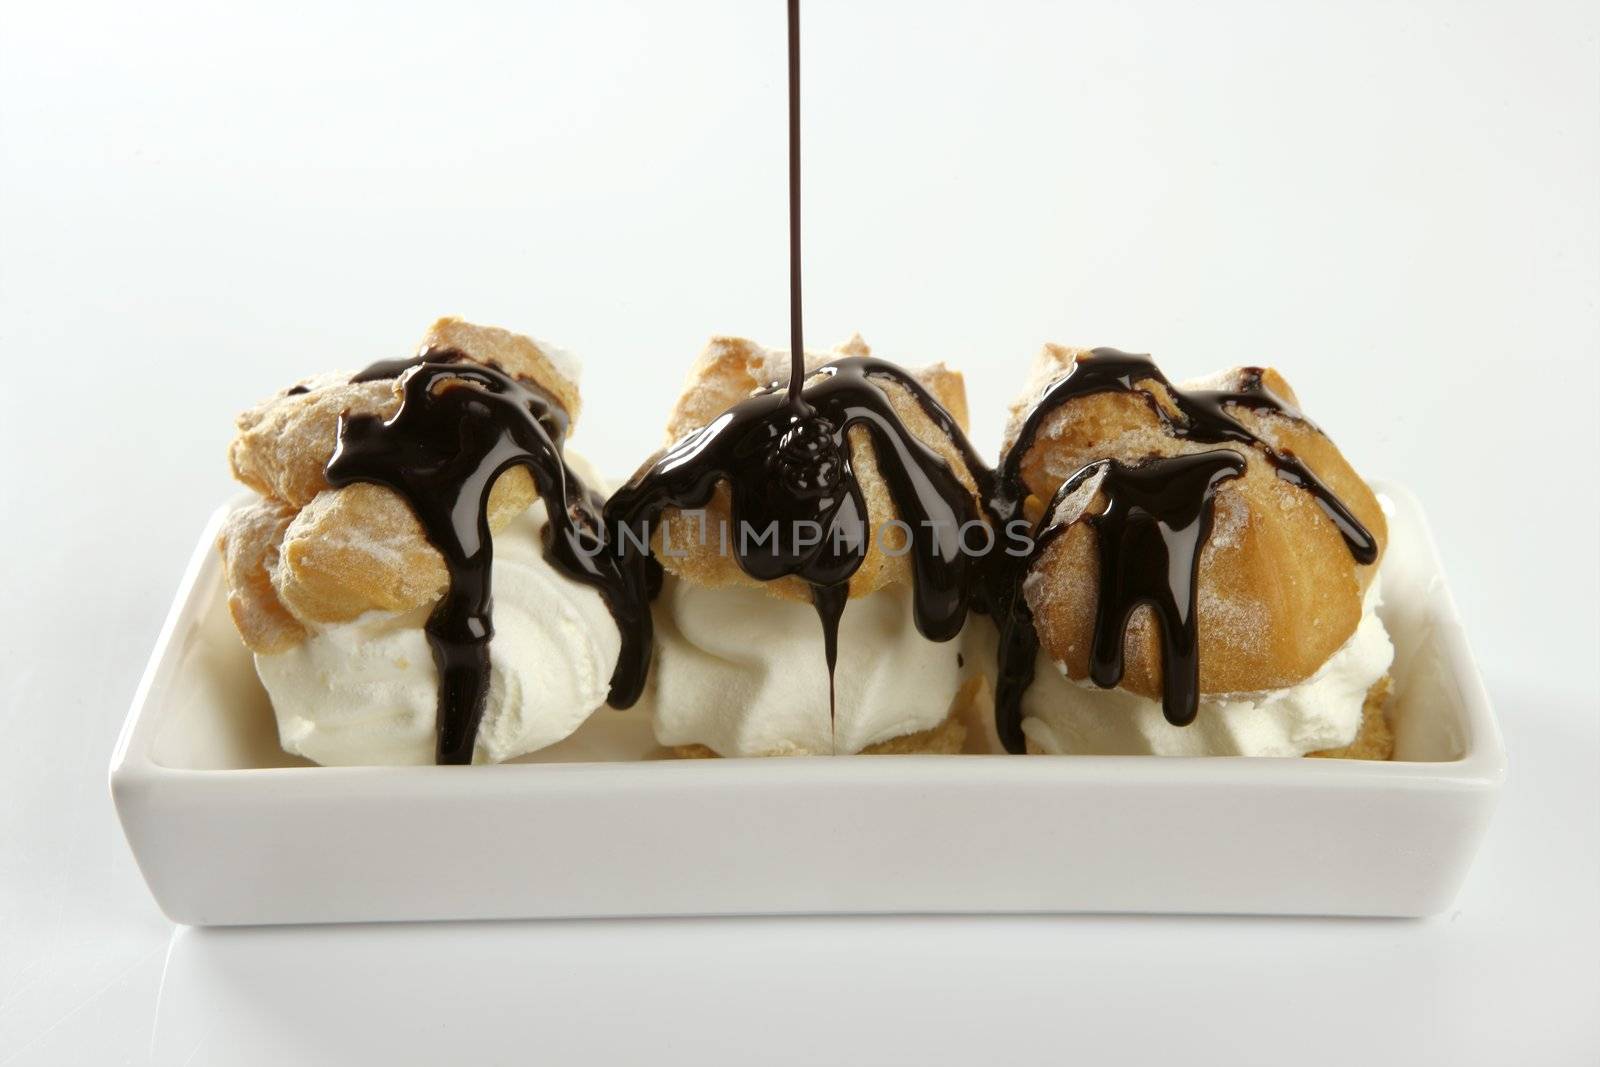 Delicious cream puff cake with chocolate syrup by lunamarina